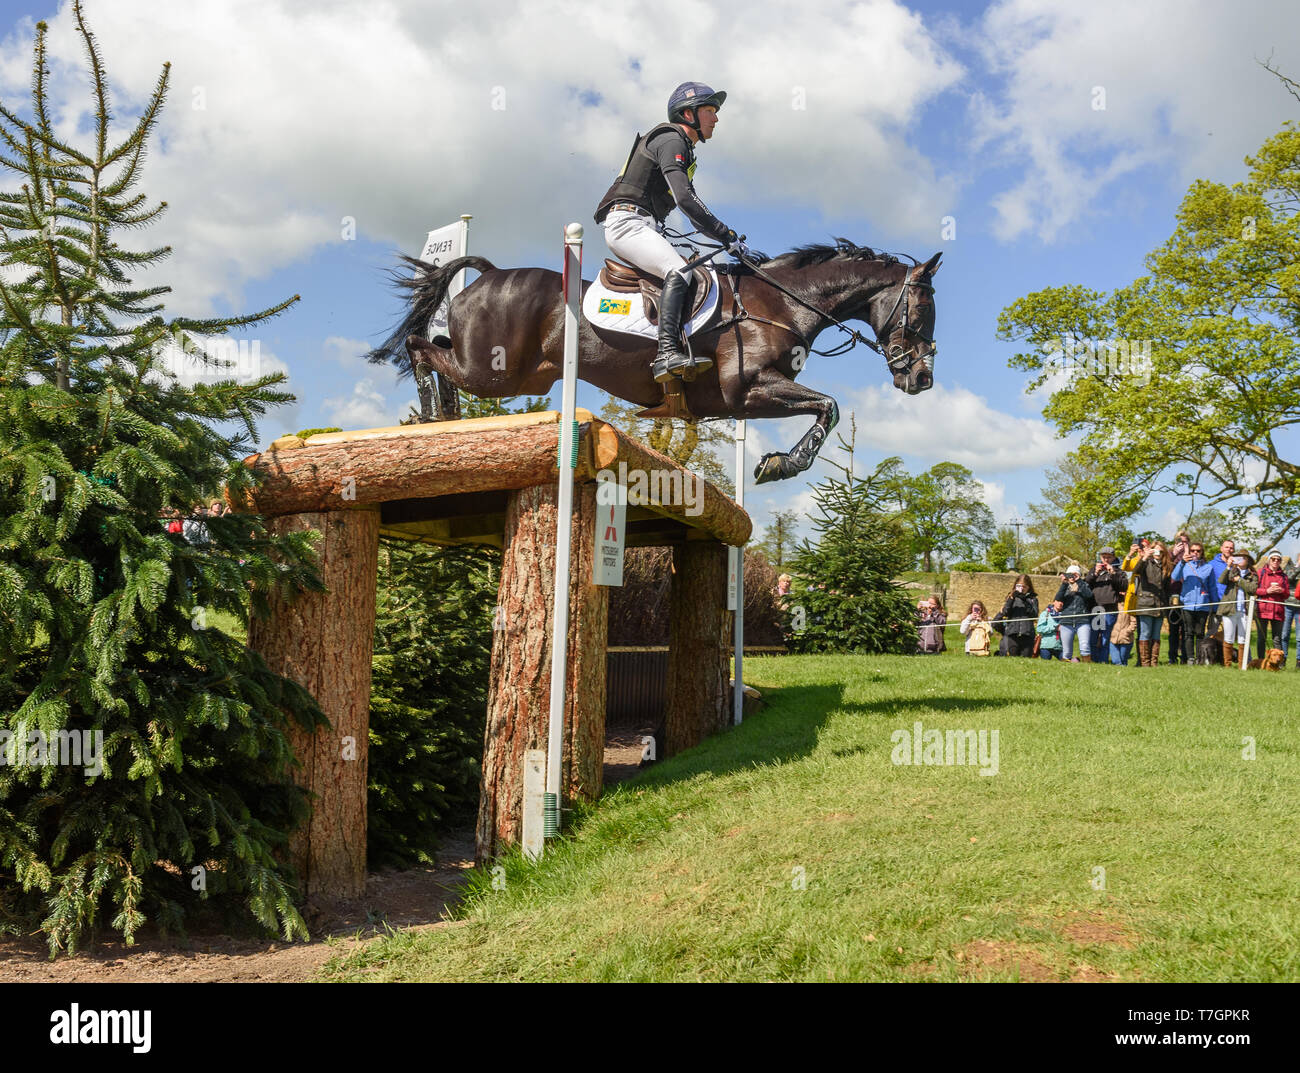 Oliver Townend and CILLNABRADDEN EVO during the cross country phase of the Mitsubishi Motors Badminton Horse Trials, May 2019 Stock Photo